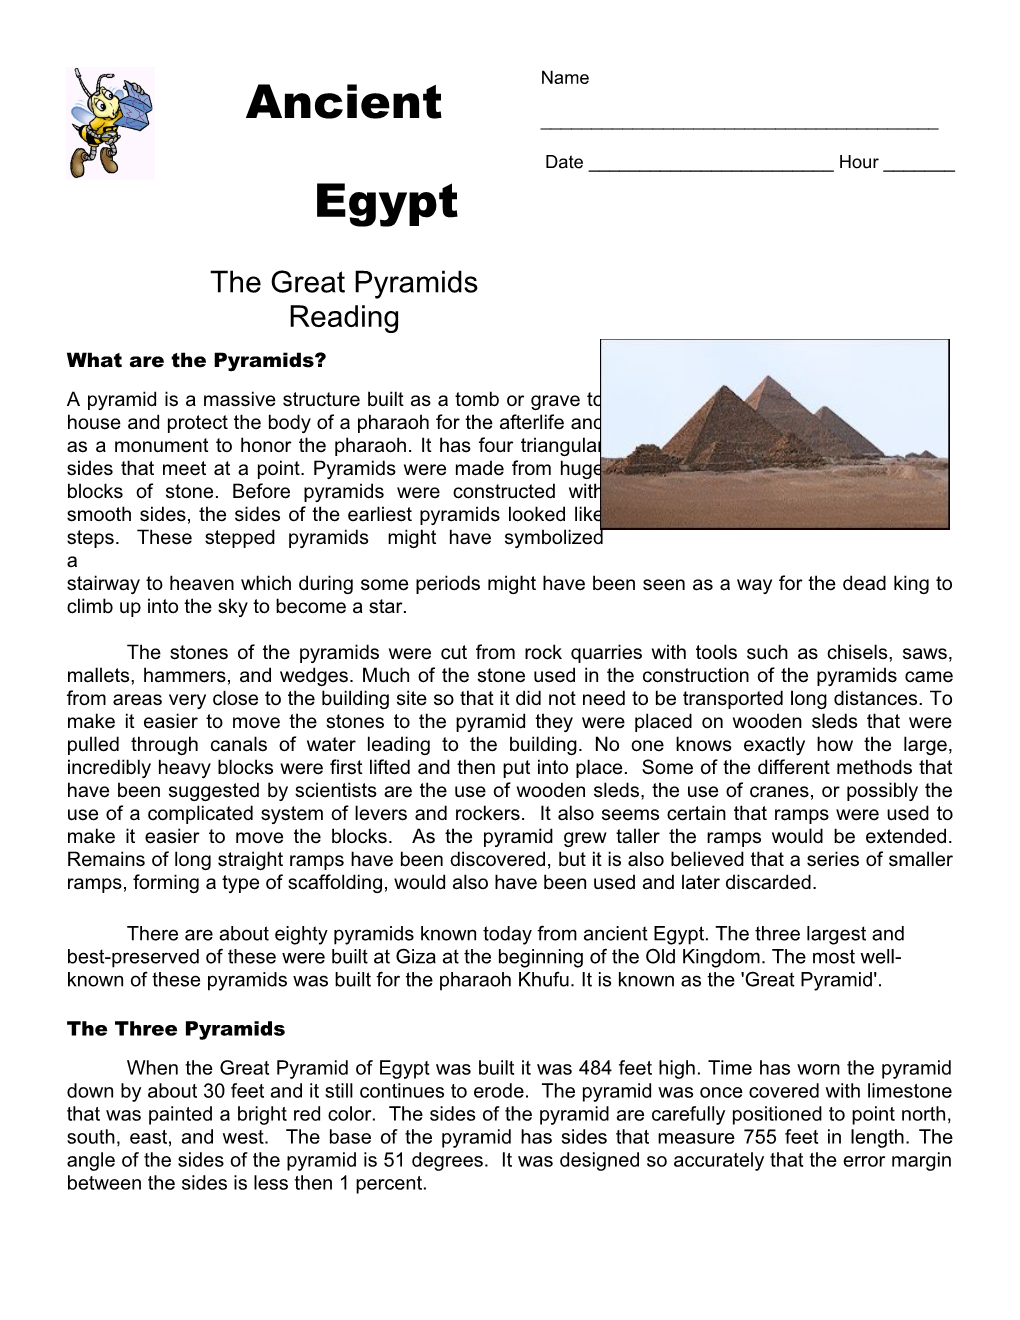 Why Were the Pyramids Built s1